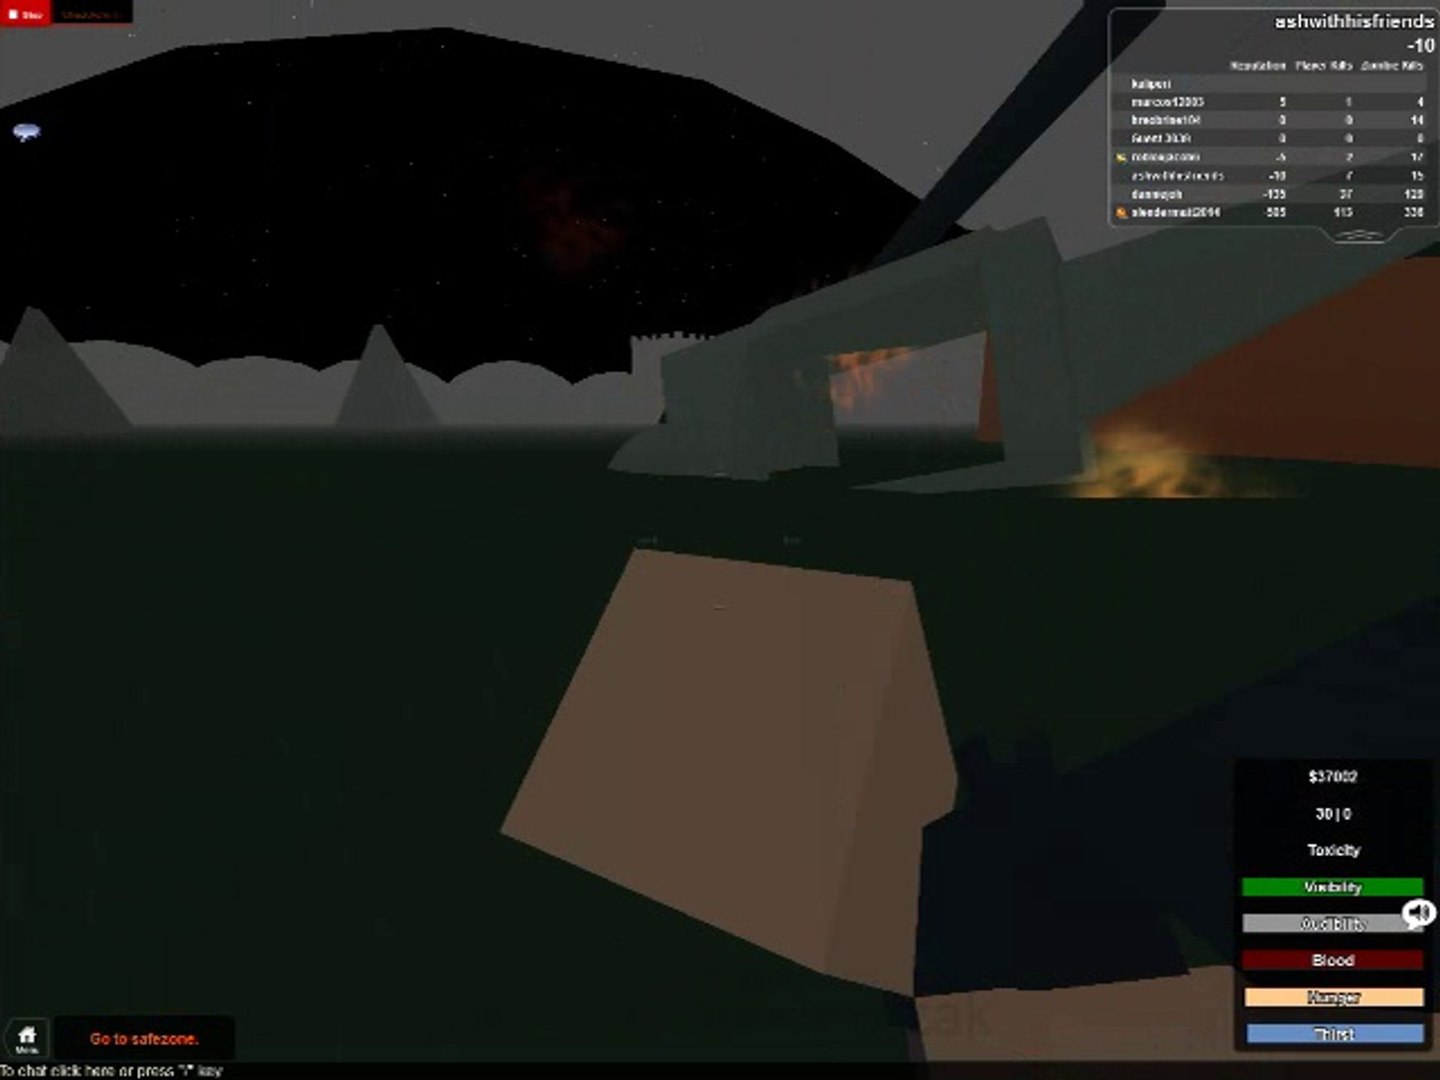 Dayz Hardcore On Roblox Part 1 Dead In This Episode Video Dailymotion - dayz hardcore on roblox part 1 dead in this episode